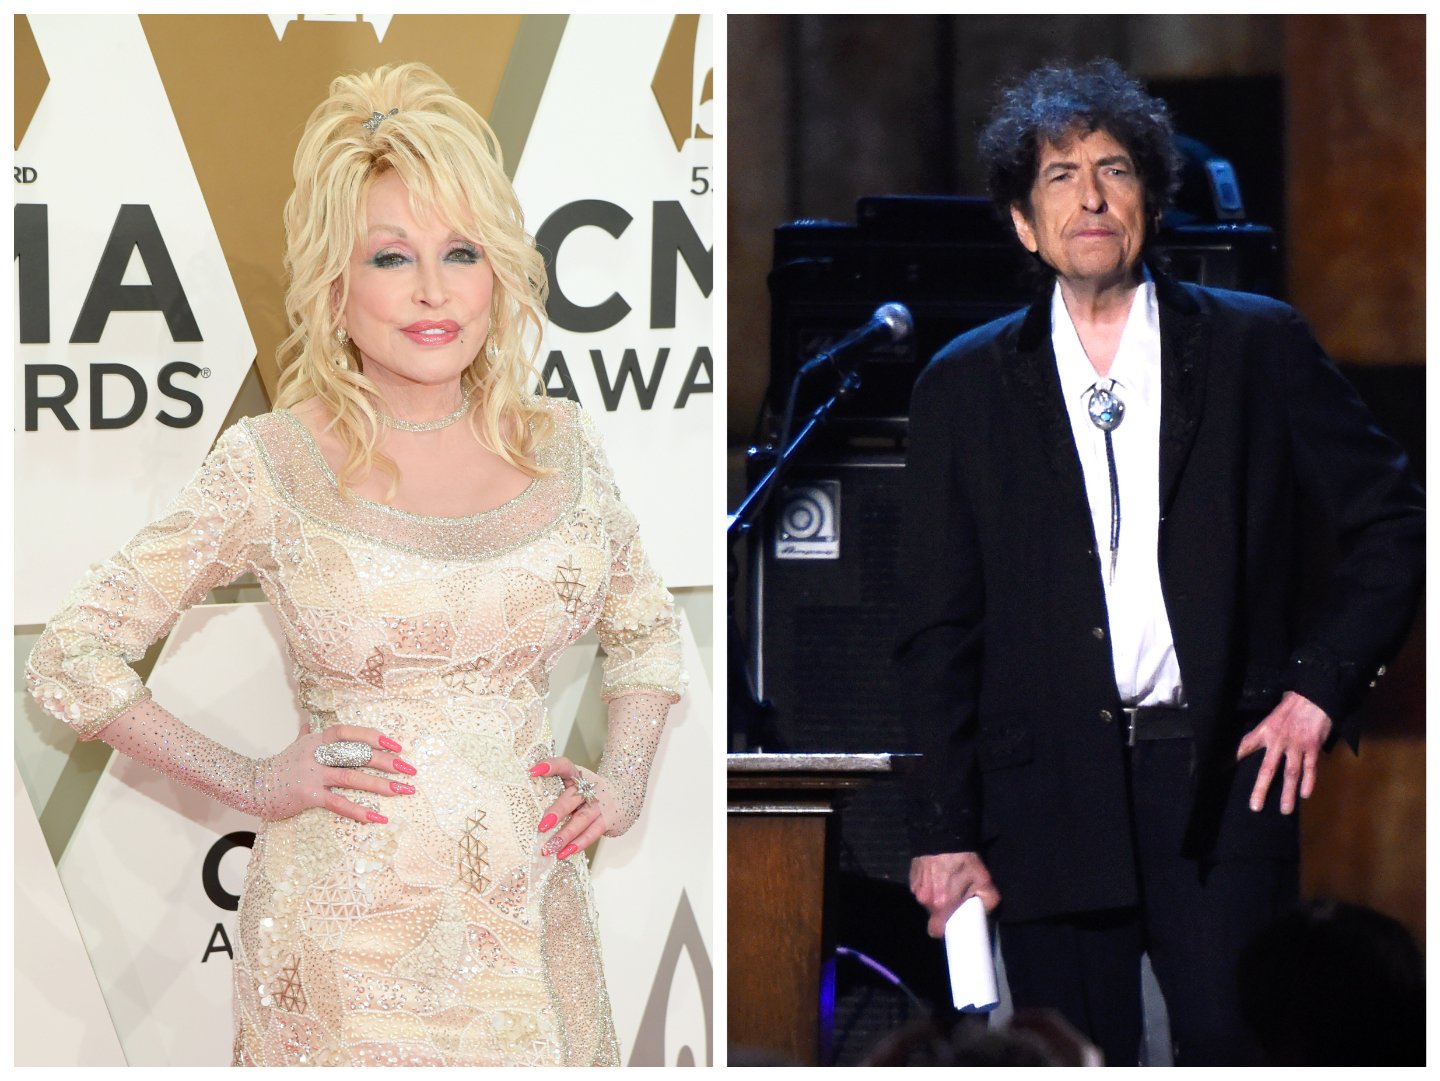 Dolly Parton wears a white dress and stands with her hands on her hips. Bob Dylan wears a bolo tie and stands with one hand on his hip.